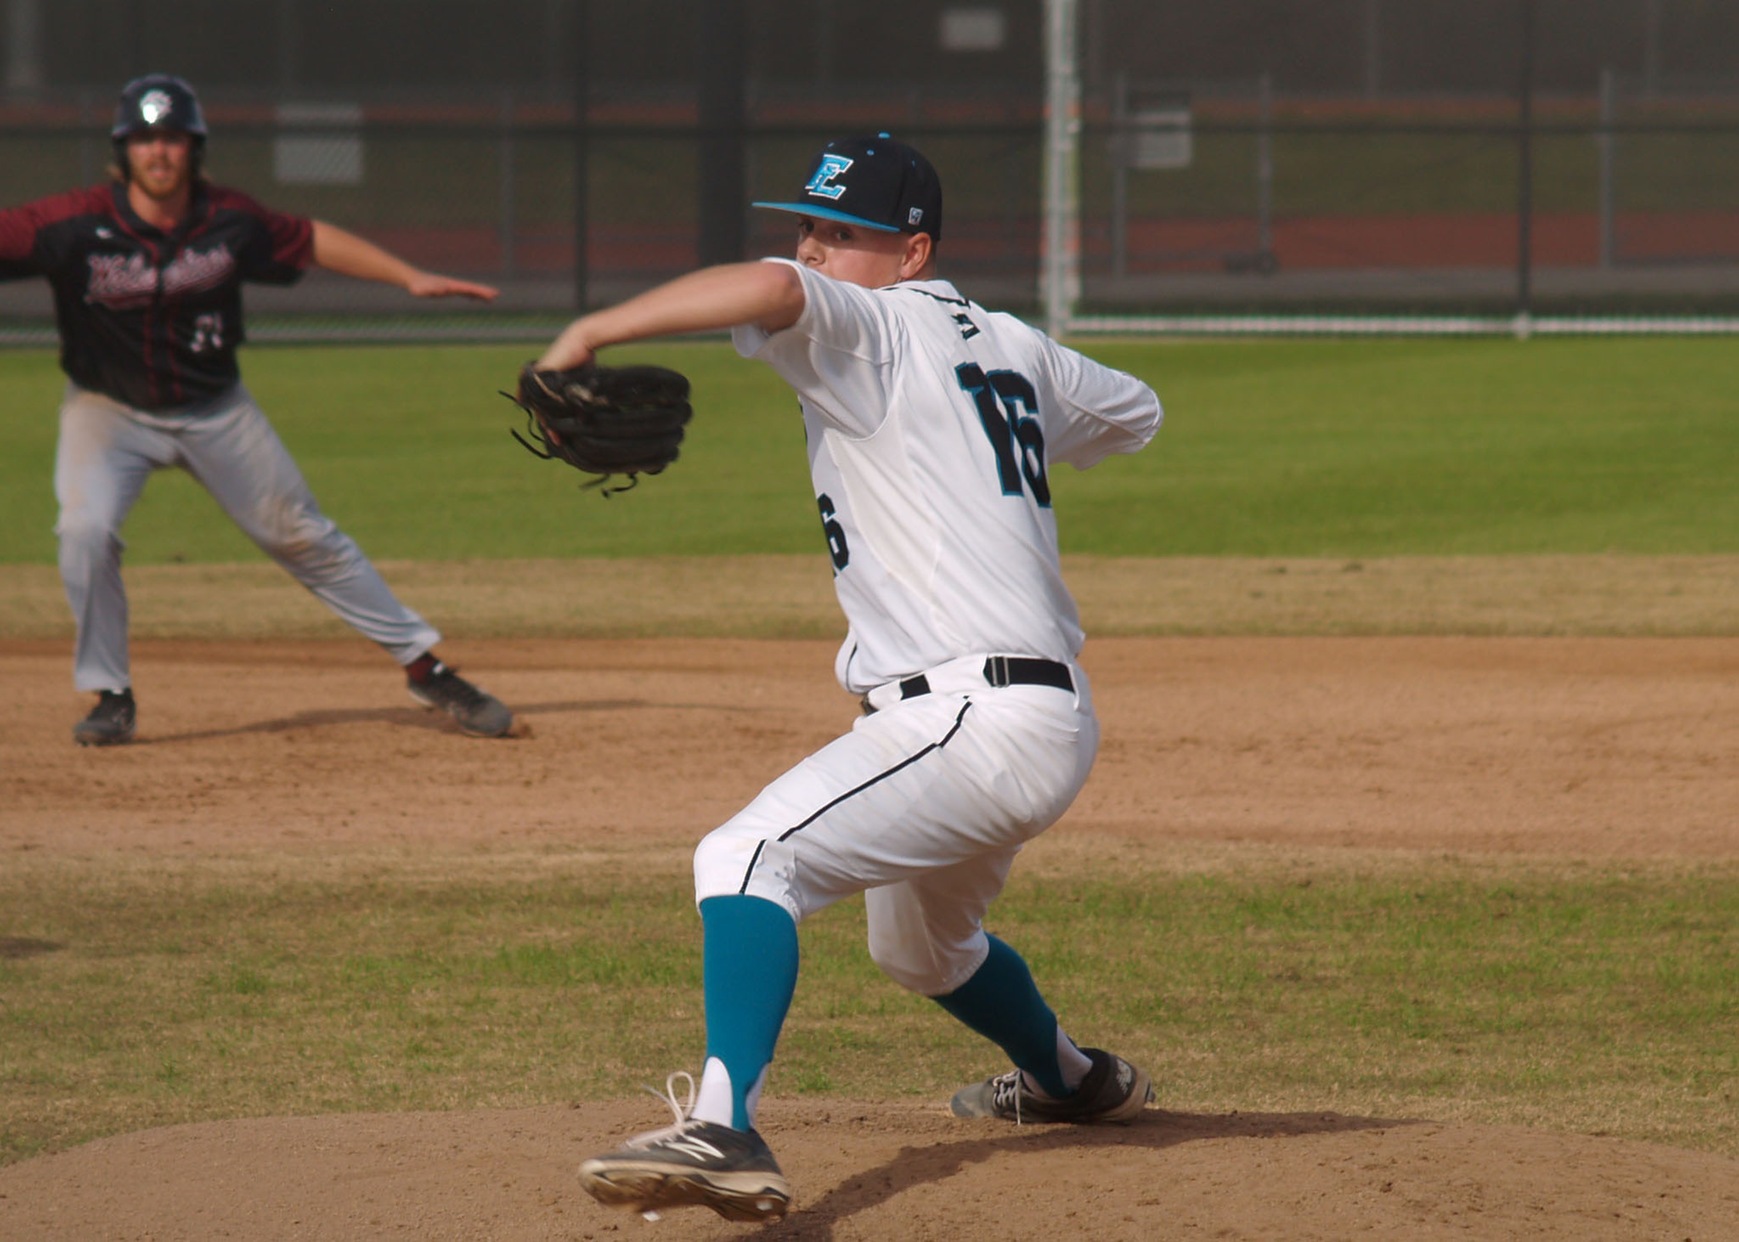 Falcon baseball team evens series with win at ARC